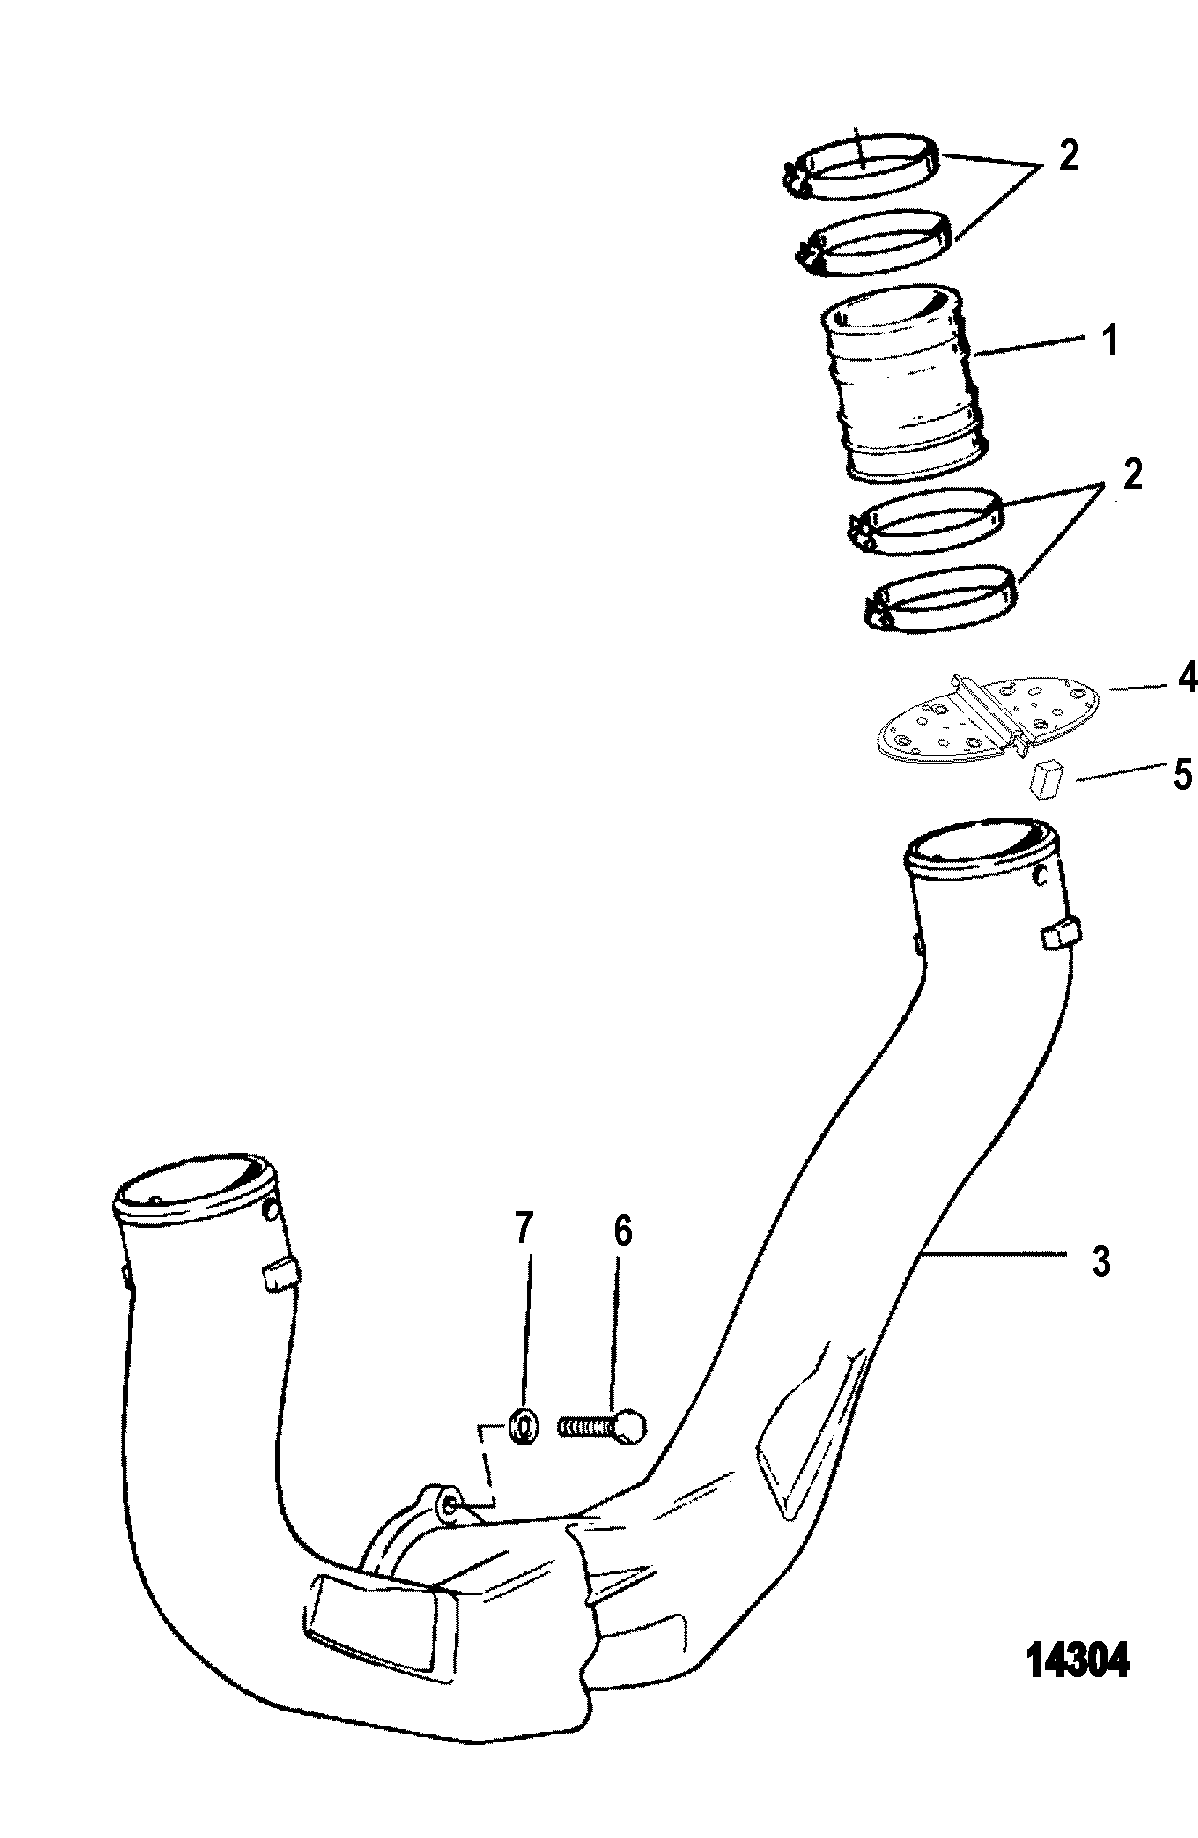 Exhaust System(Use With One Piece Manifold)